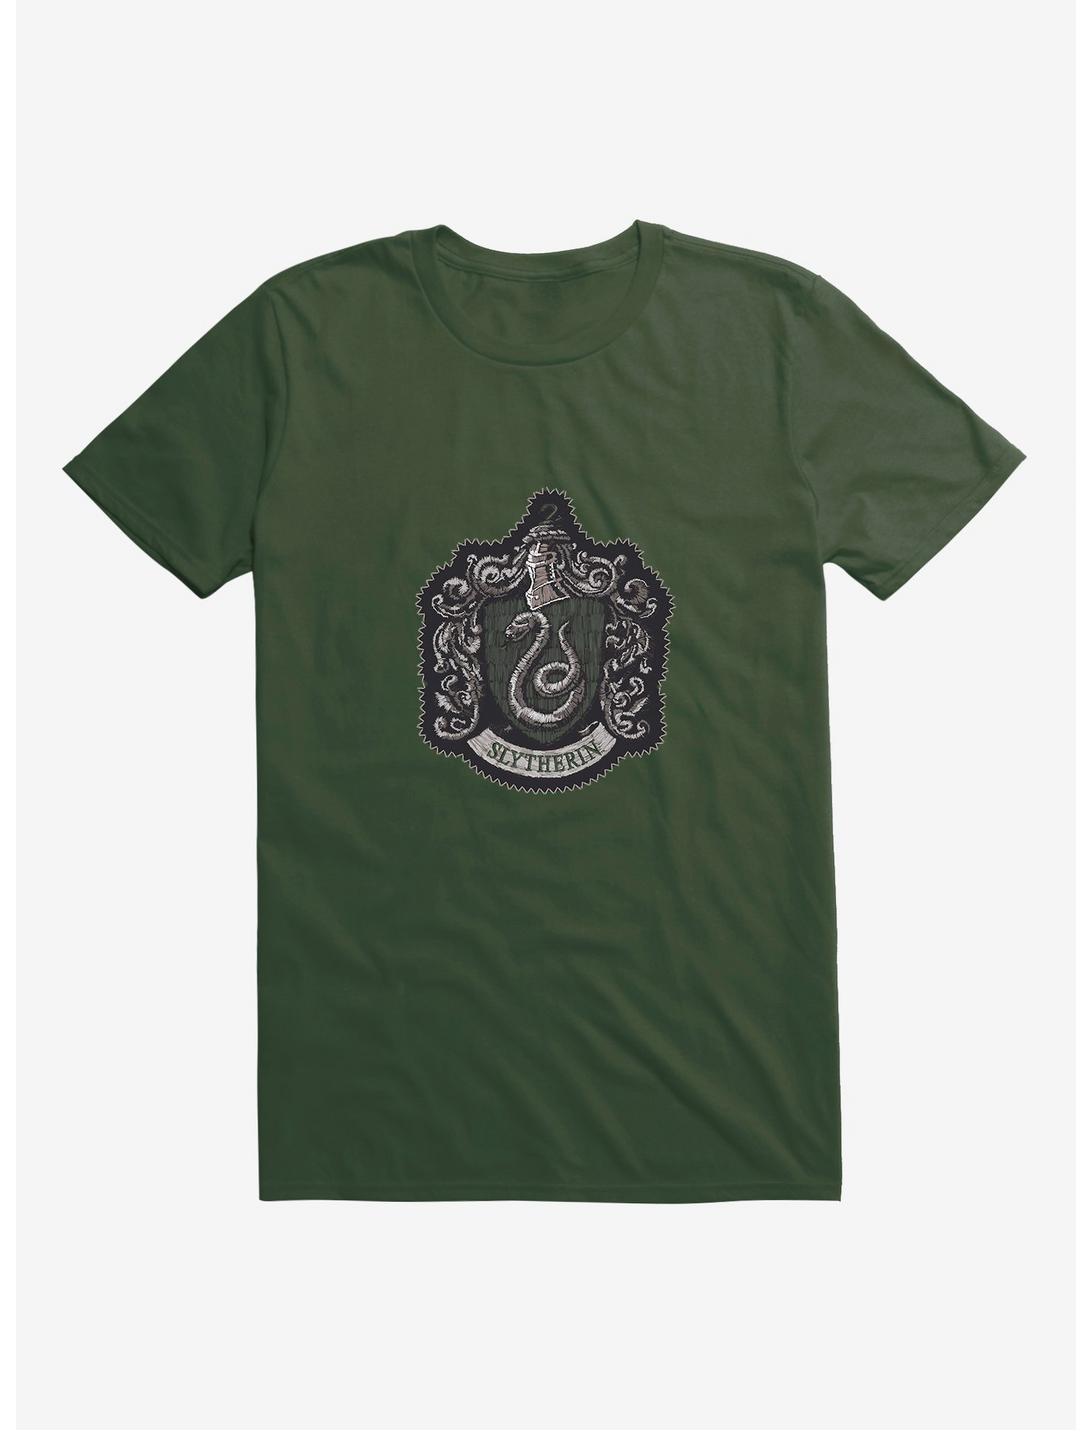 Harry Potter Slytherin Coat of Arms T-Shirt, CITY GREEN, hi-res